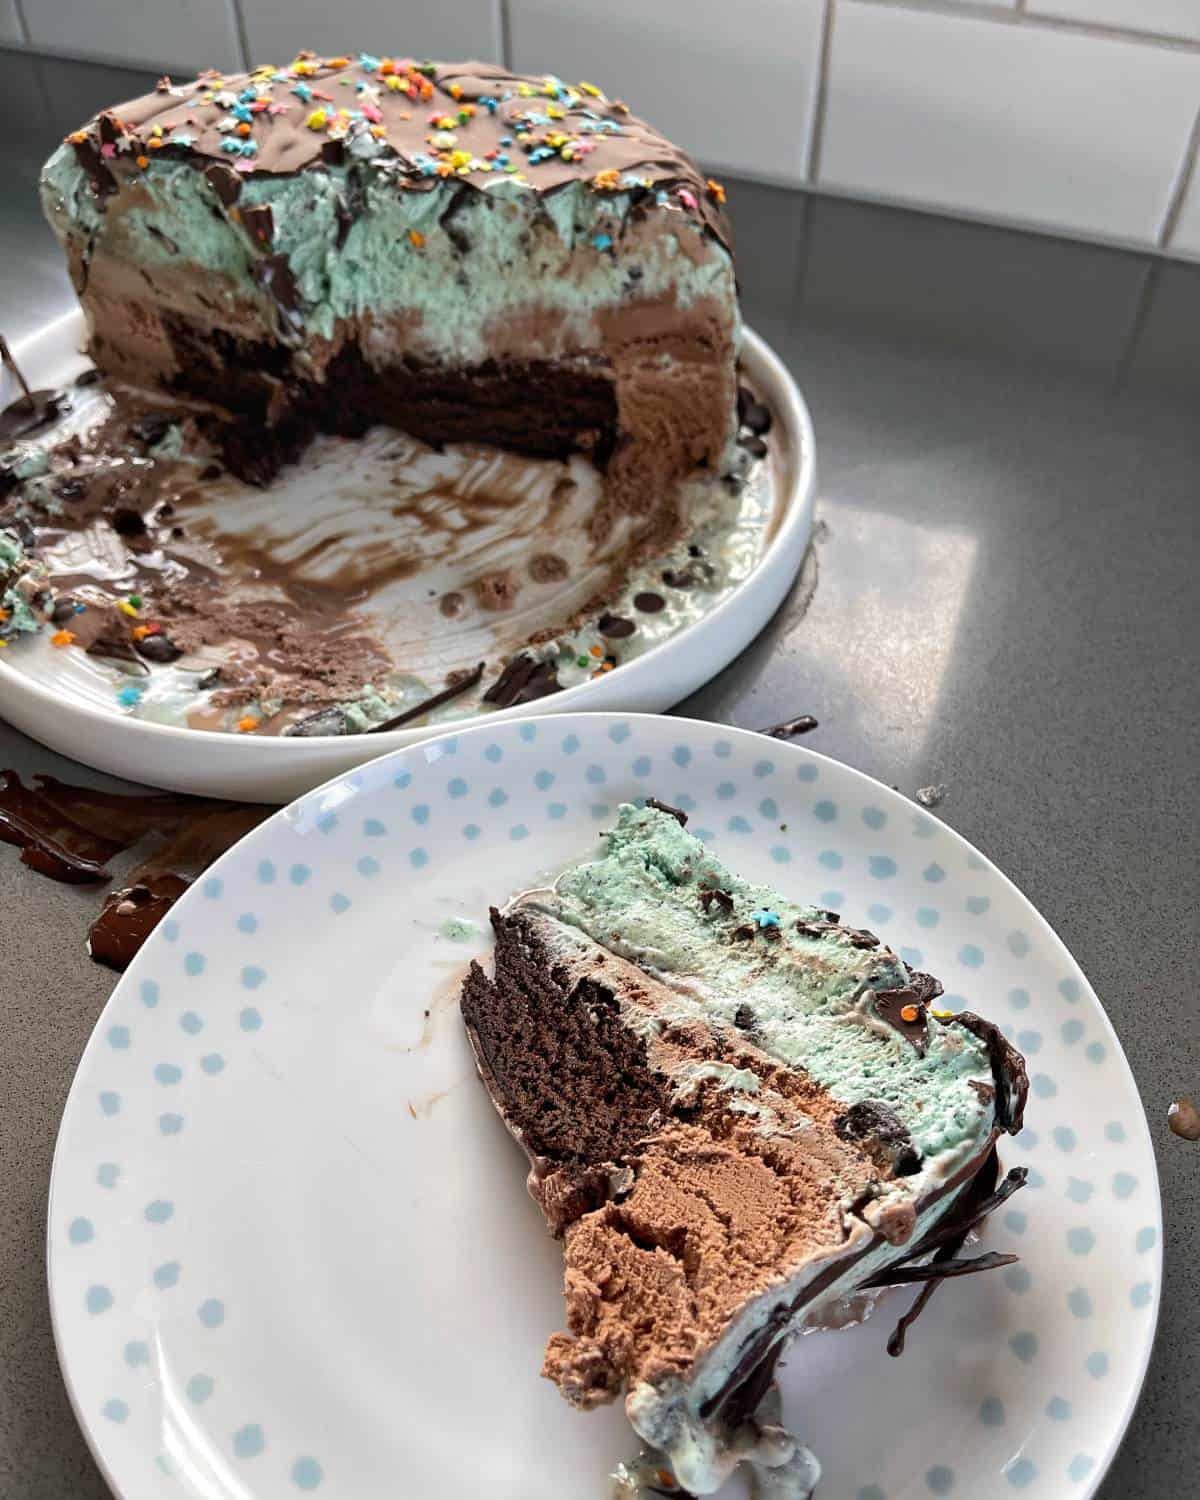 A piece of ice cream cake on a plate next to the remainder of the cake on another plate.